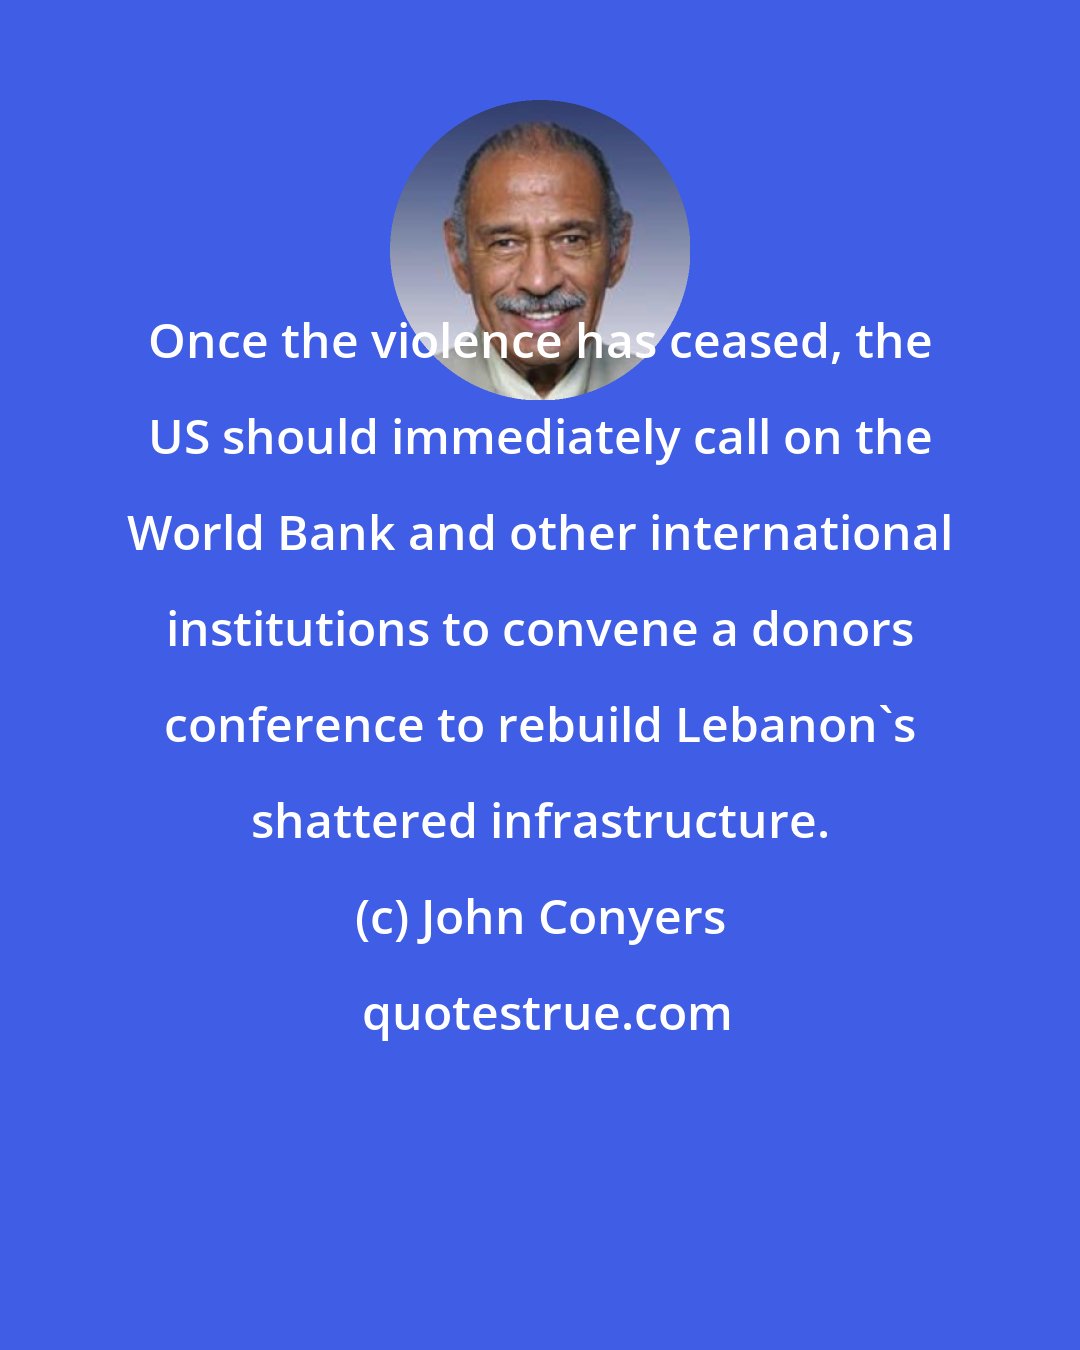 John Conyers: Once the violence has ceased, the US should immediately call on the World Bank and other international institutions to convene a donors conference to rebuild Lebanon's shattered infrastructure.